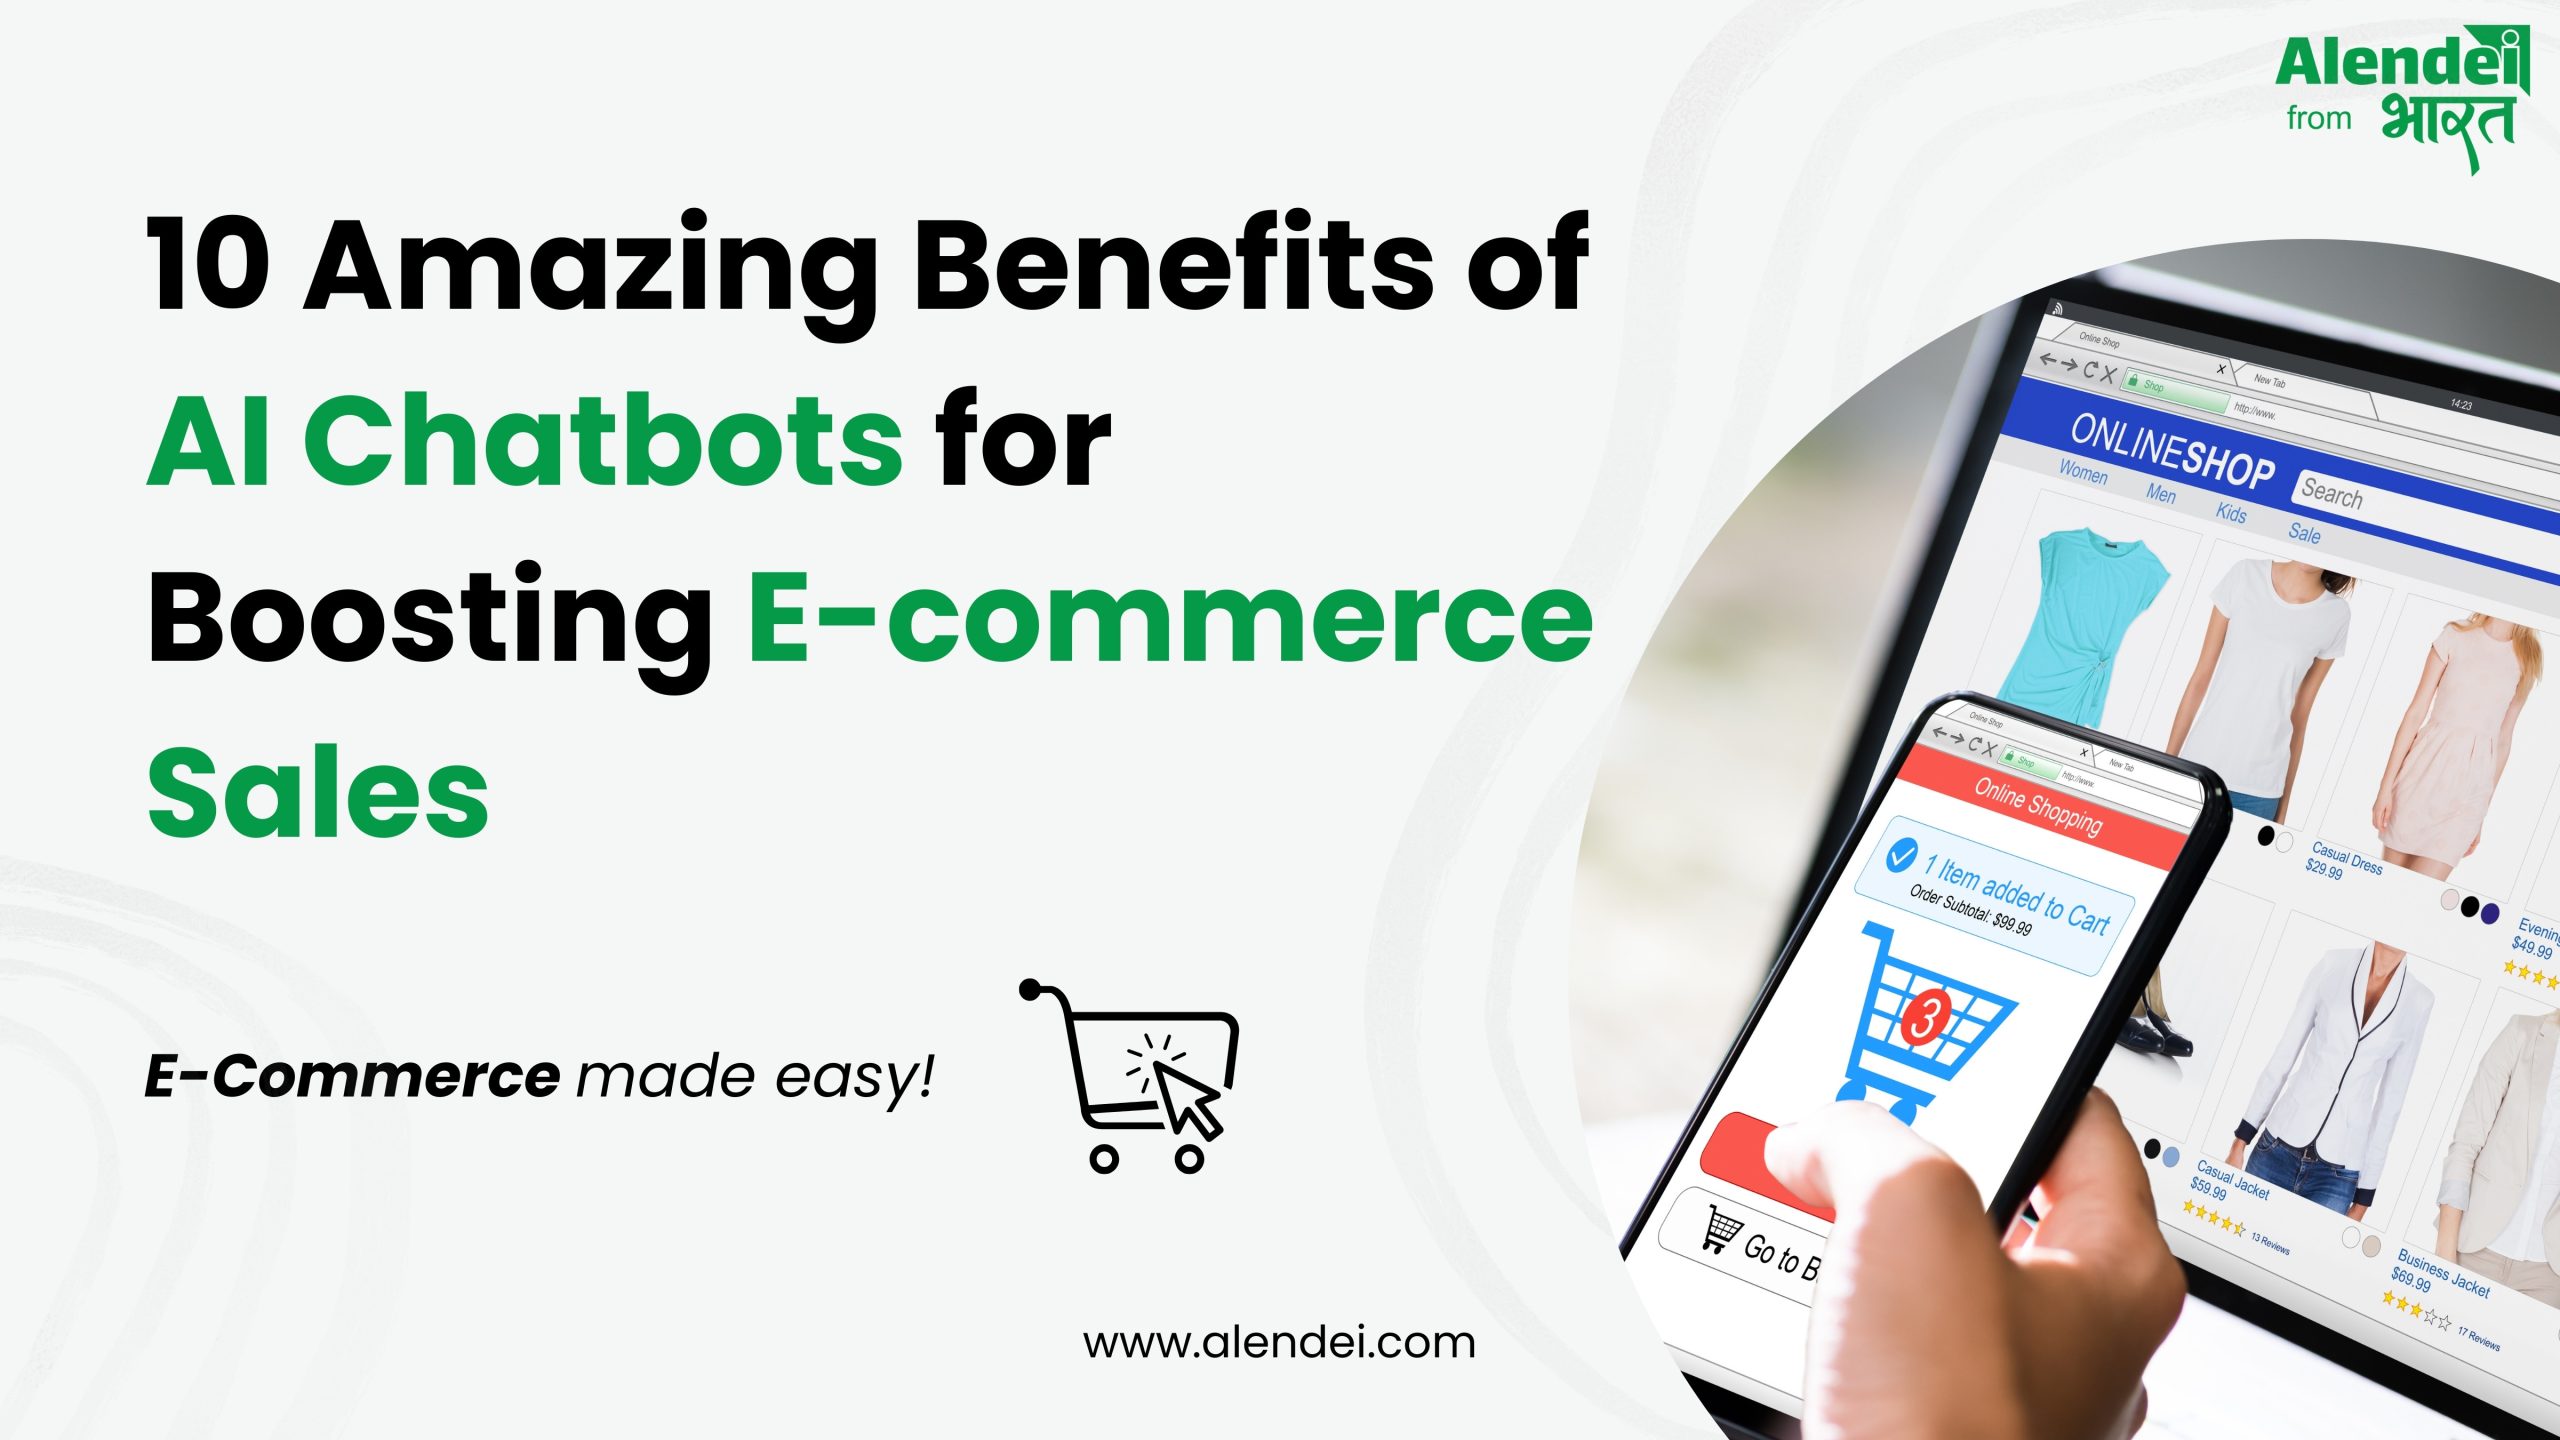 10 Amazing Benefits of AI Chatbots for Boosting E-commerce Sales